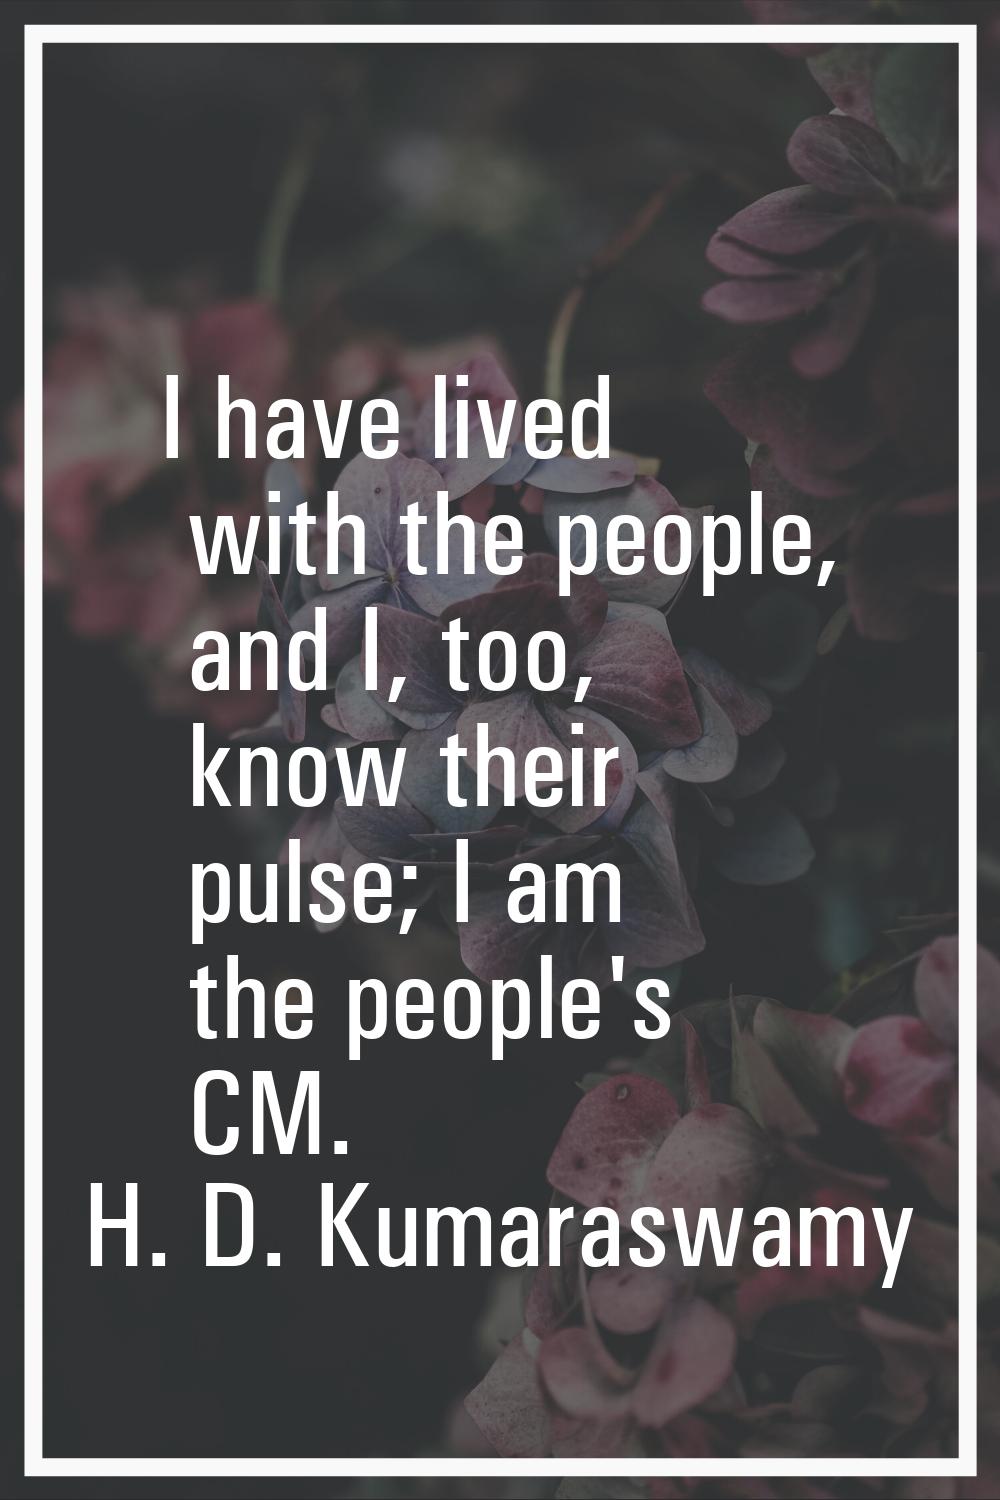 I have lived with the people, and I, too, know their pulse; I am the people's CM.